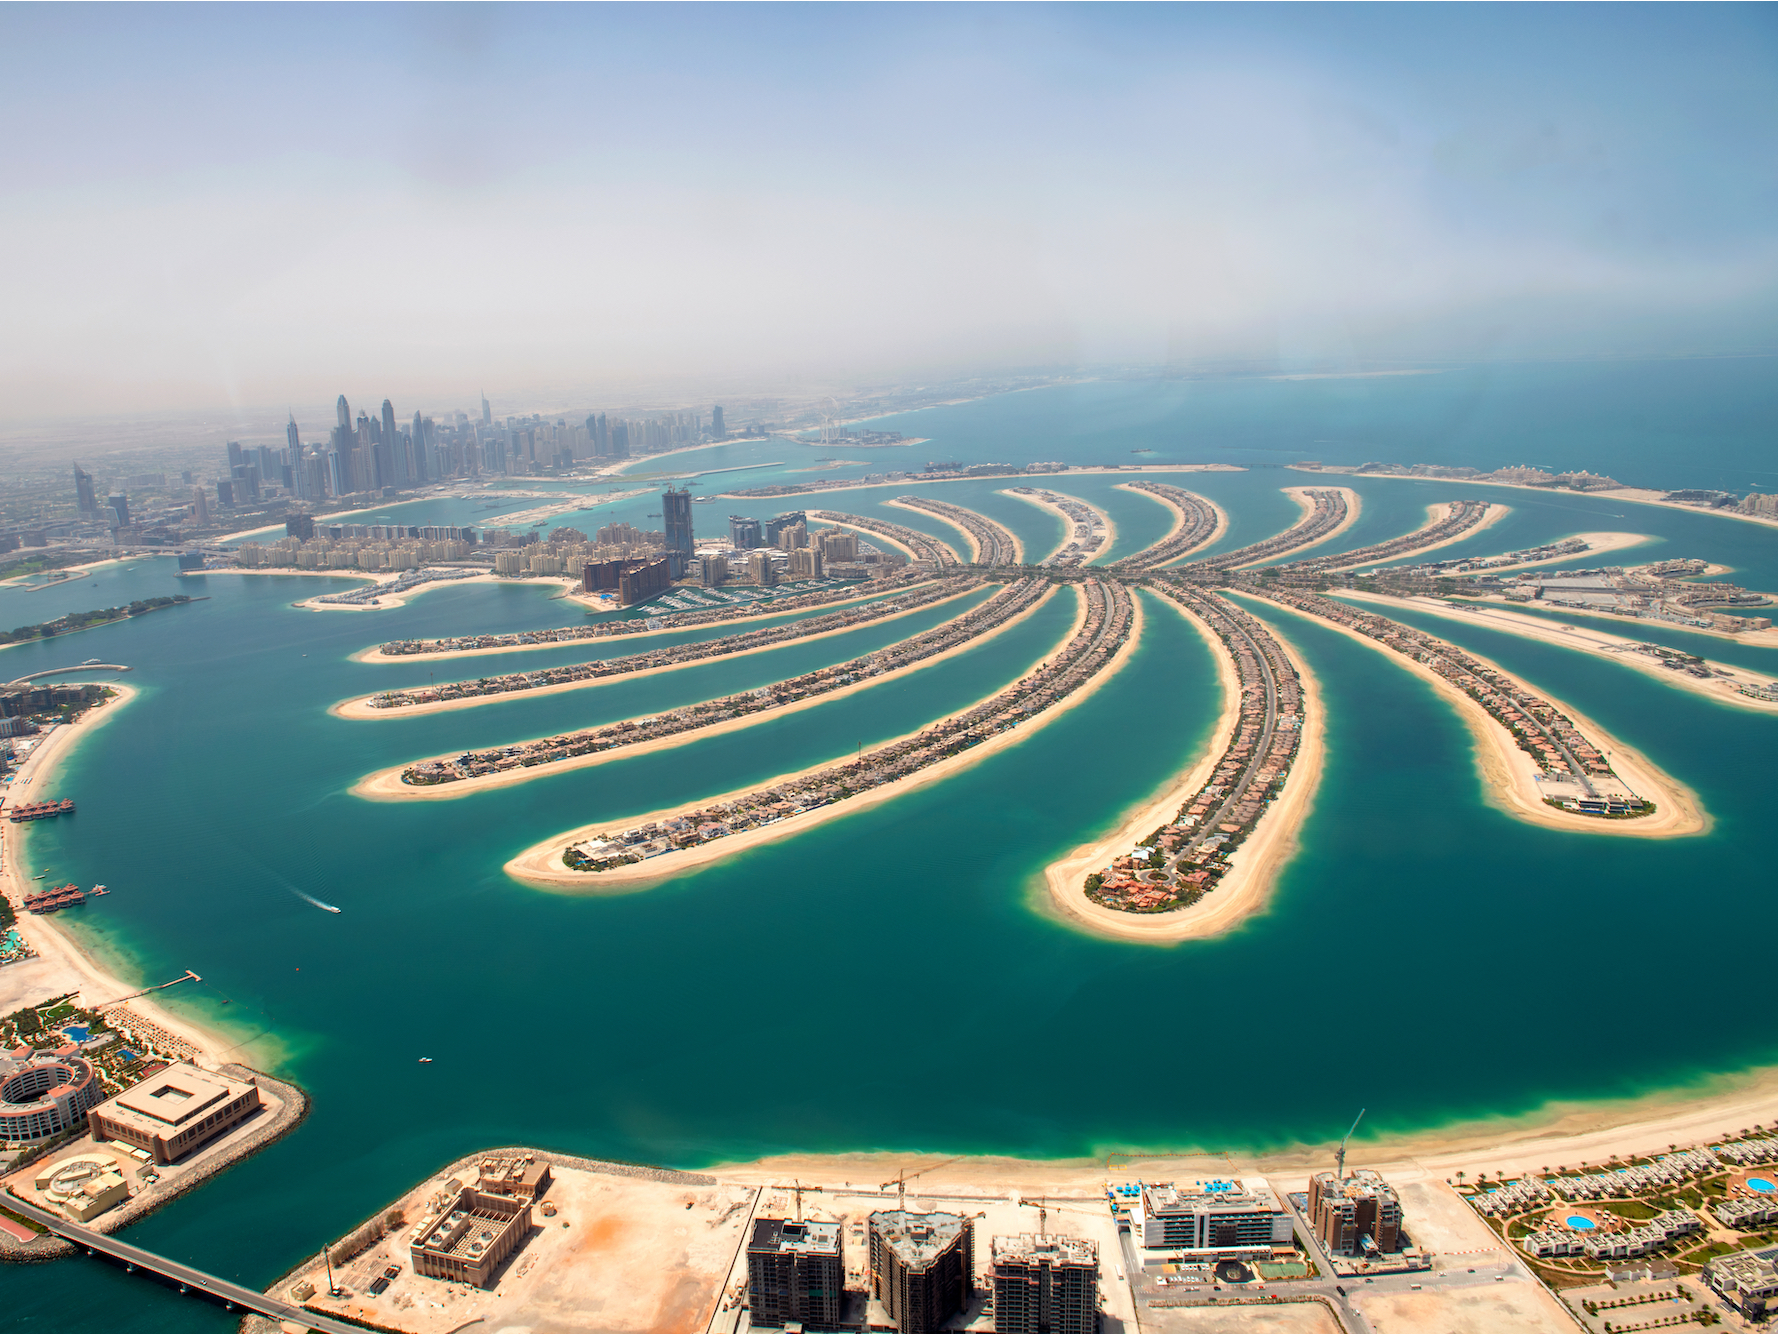 Palm Jumeirah, the world's largest artificial island.